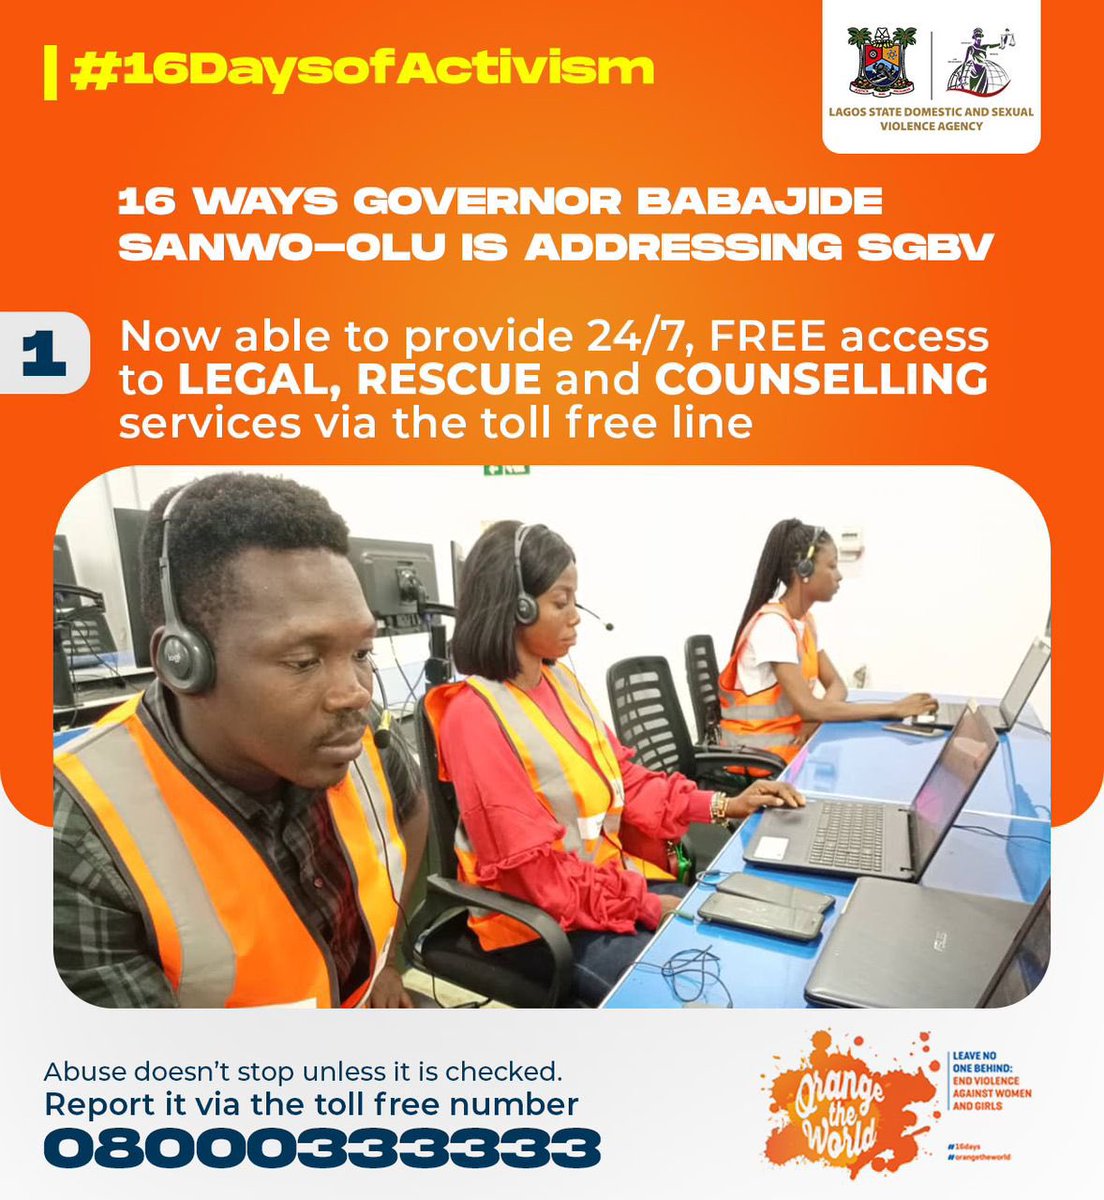 16 ways Governor Babajide Sanwo-Olu is Walking the Talk in eradicating Sexual & Gender Based Violence

1. We now provide 24/7 access to free counseling, rescue and legal support through the tolll free line- 08000 333 333
#16daysofactivism
#OrangeTheWorld 
#SafetyInANumber